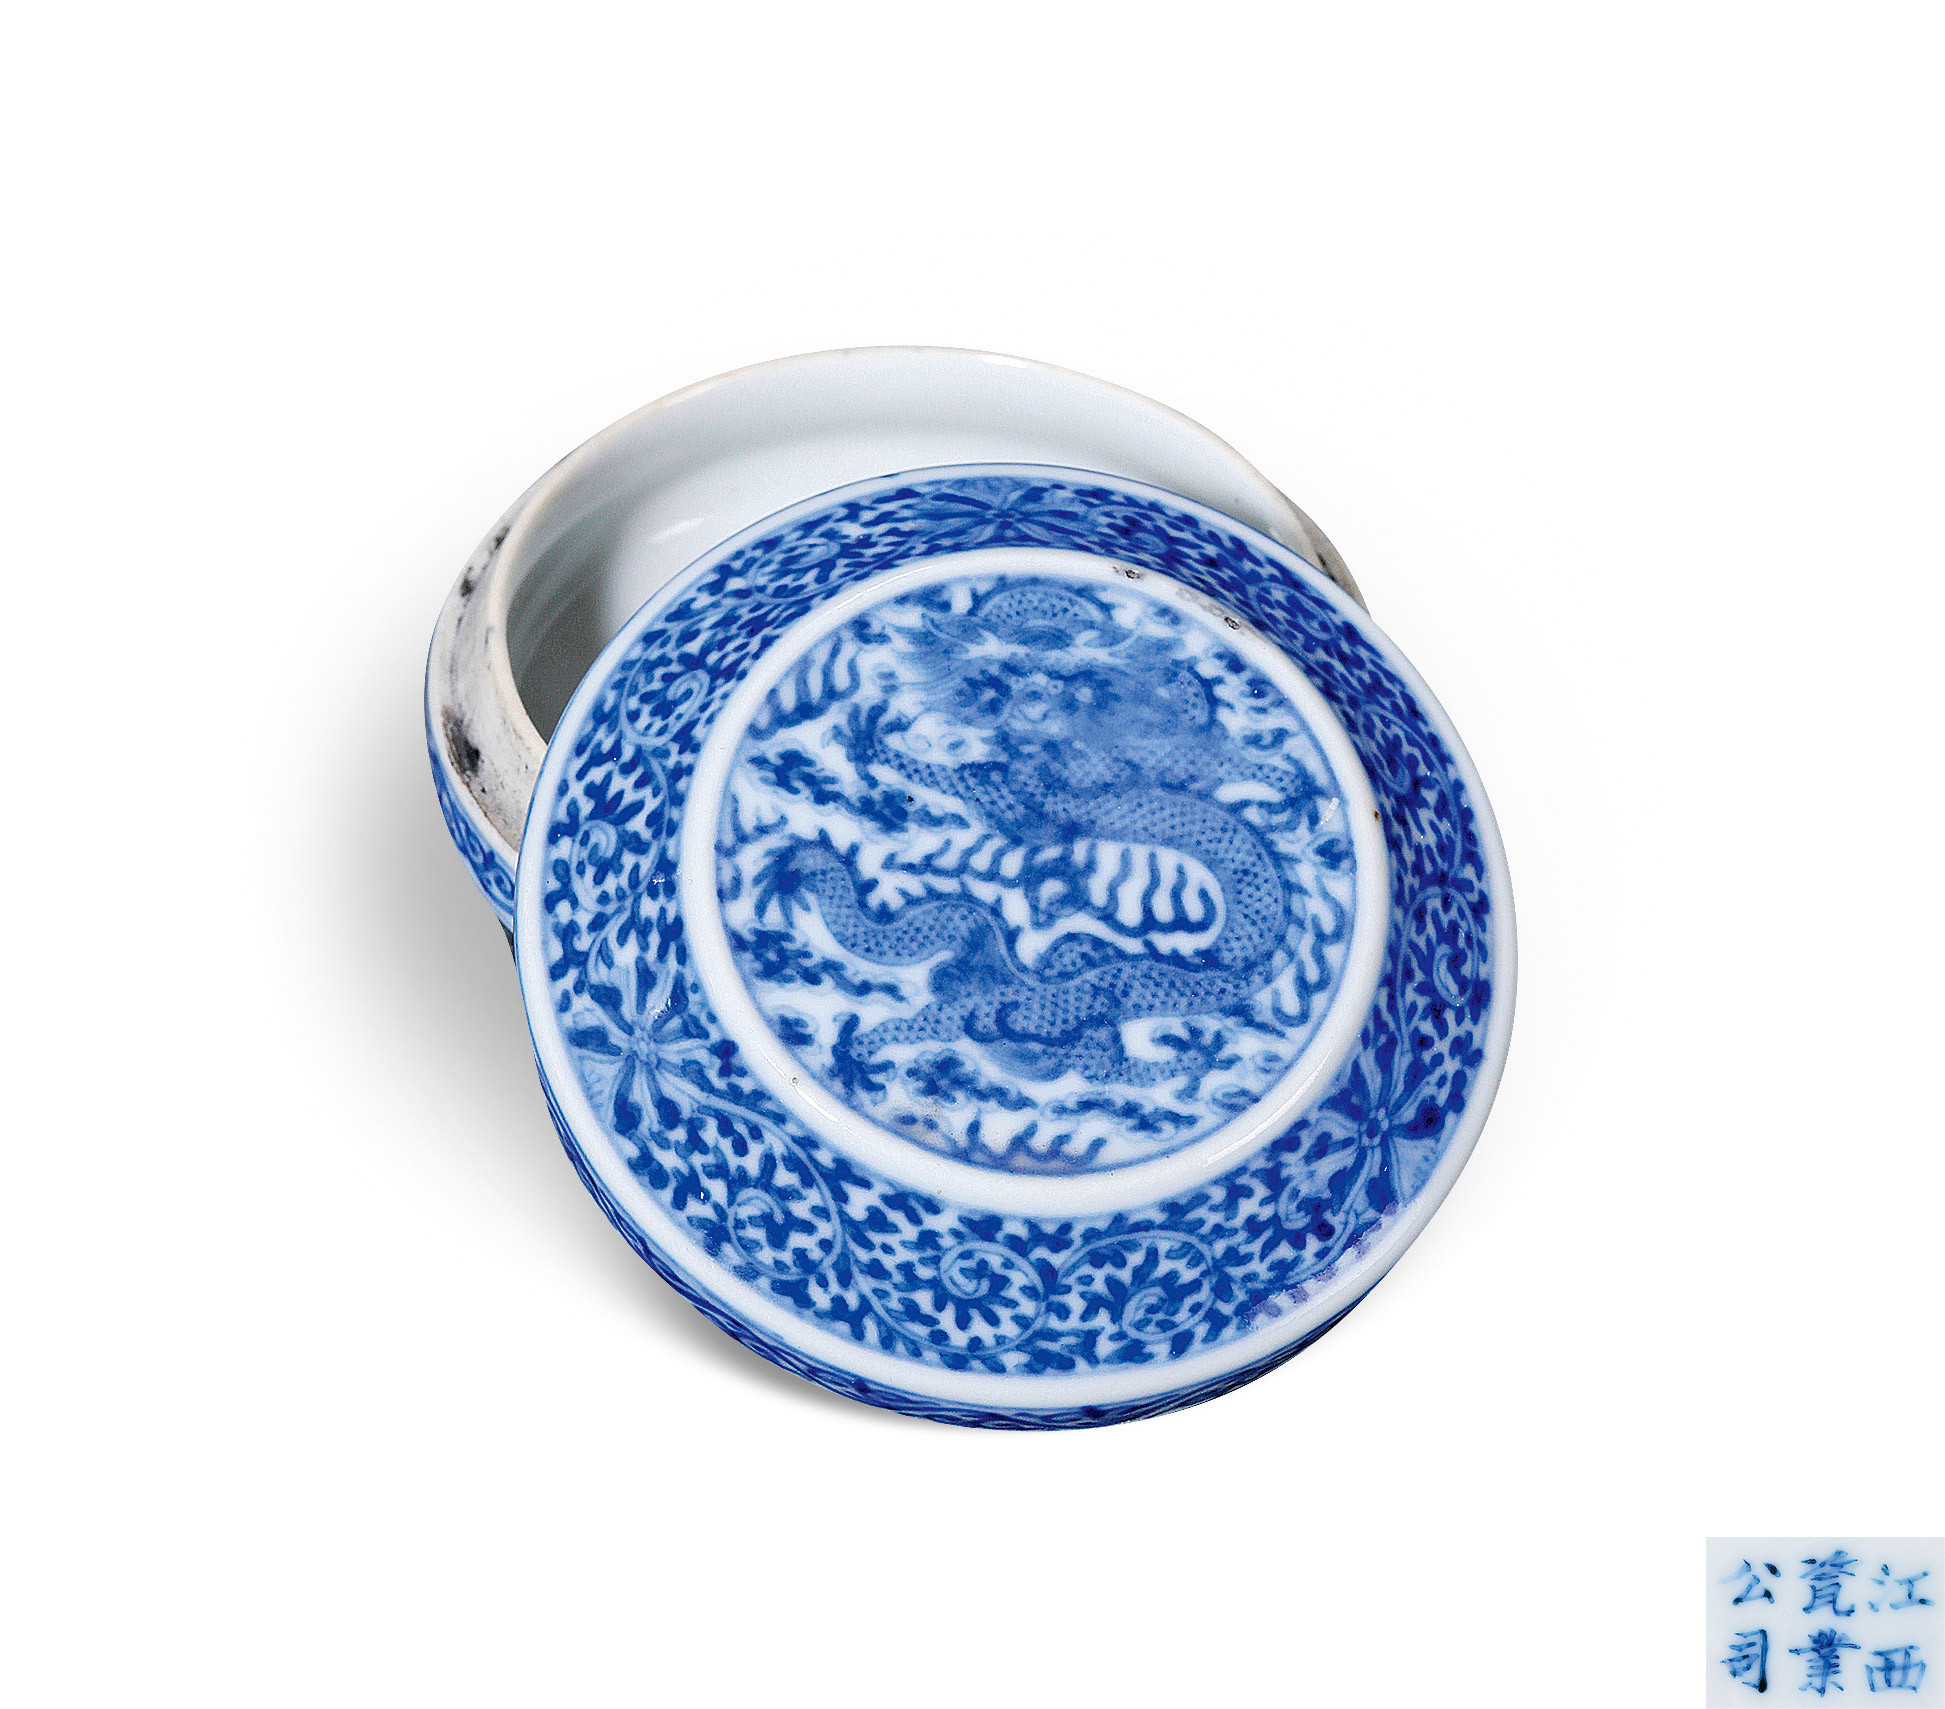 A BLUE AND WHITE SEAL BOX WITH DRAGON DESIGN